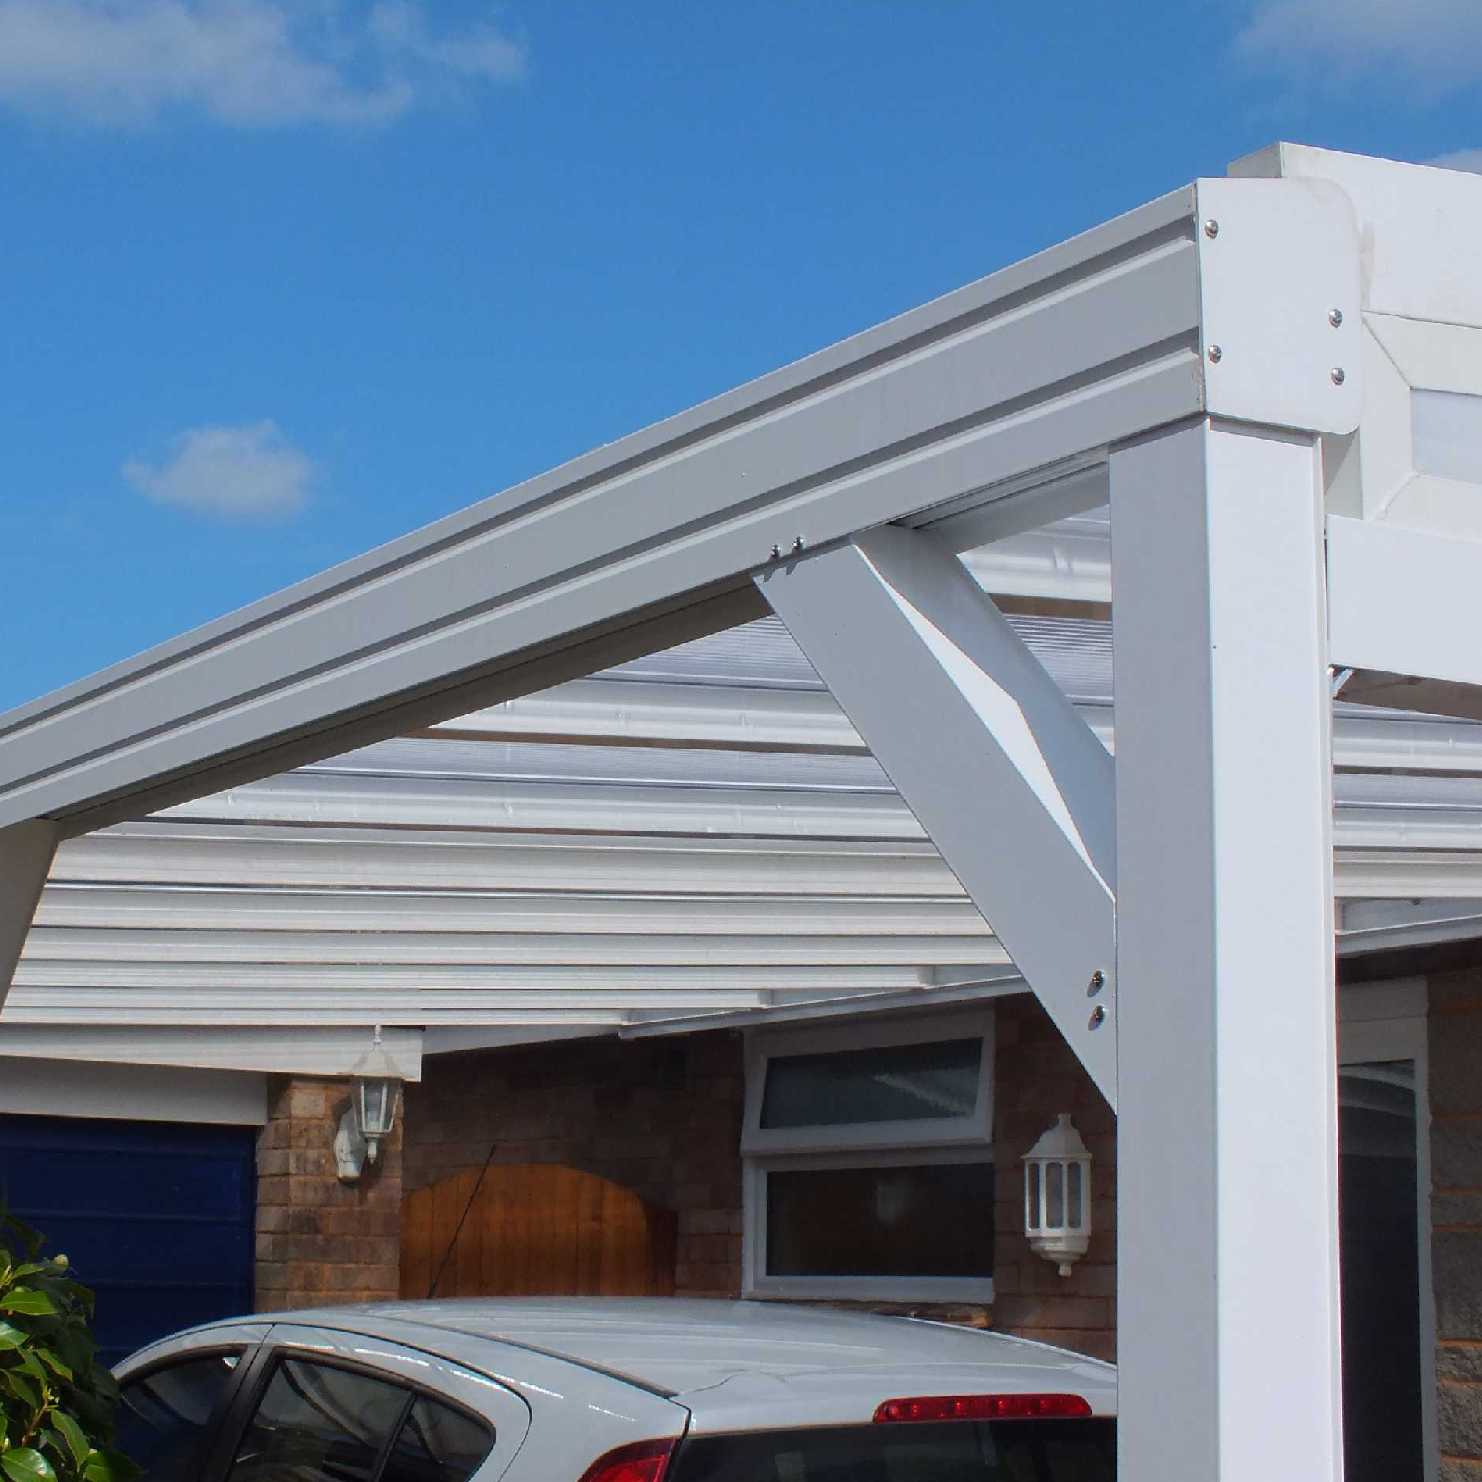 Buy Omega Smart Lean-To Canopy, White with 16mm Polycarbonate Glazing - 10.6m (W) x 2.5m (P), (5) Supporting Posts online today